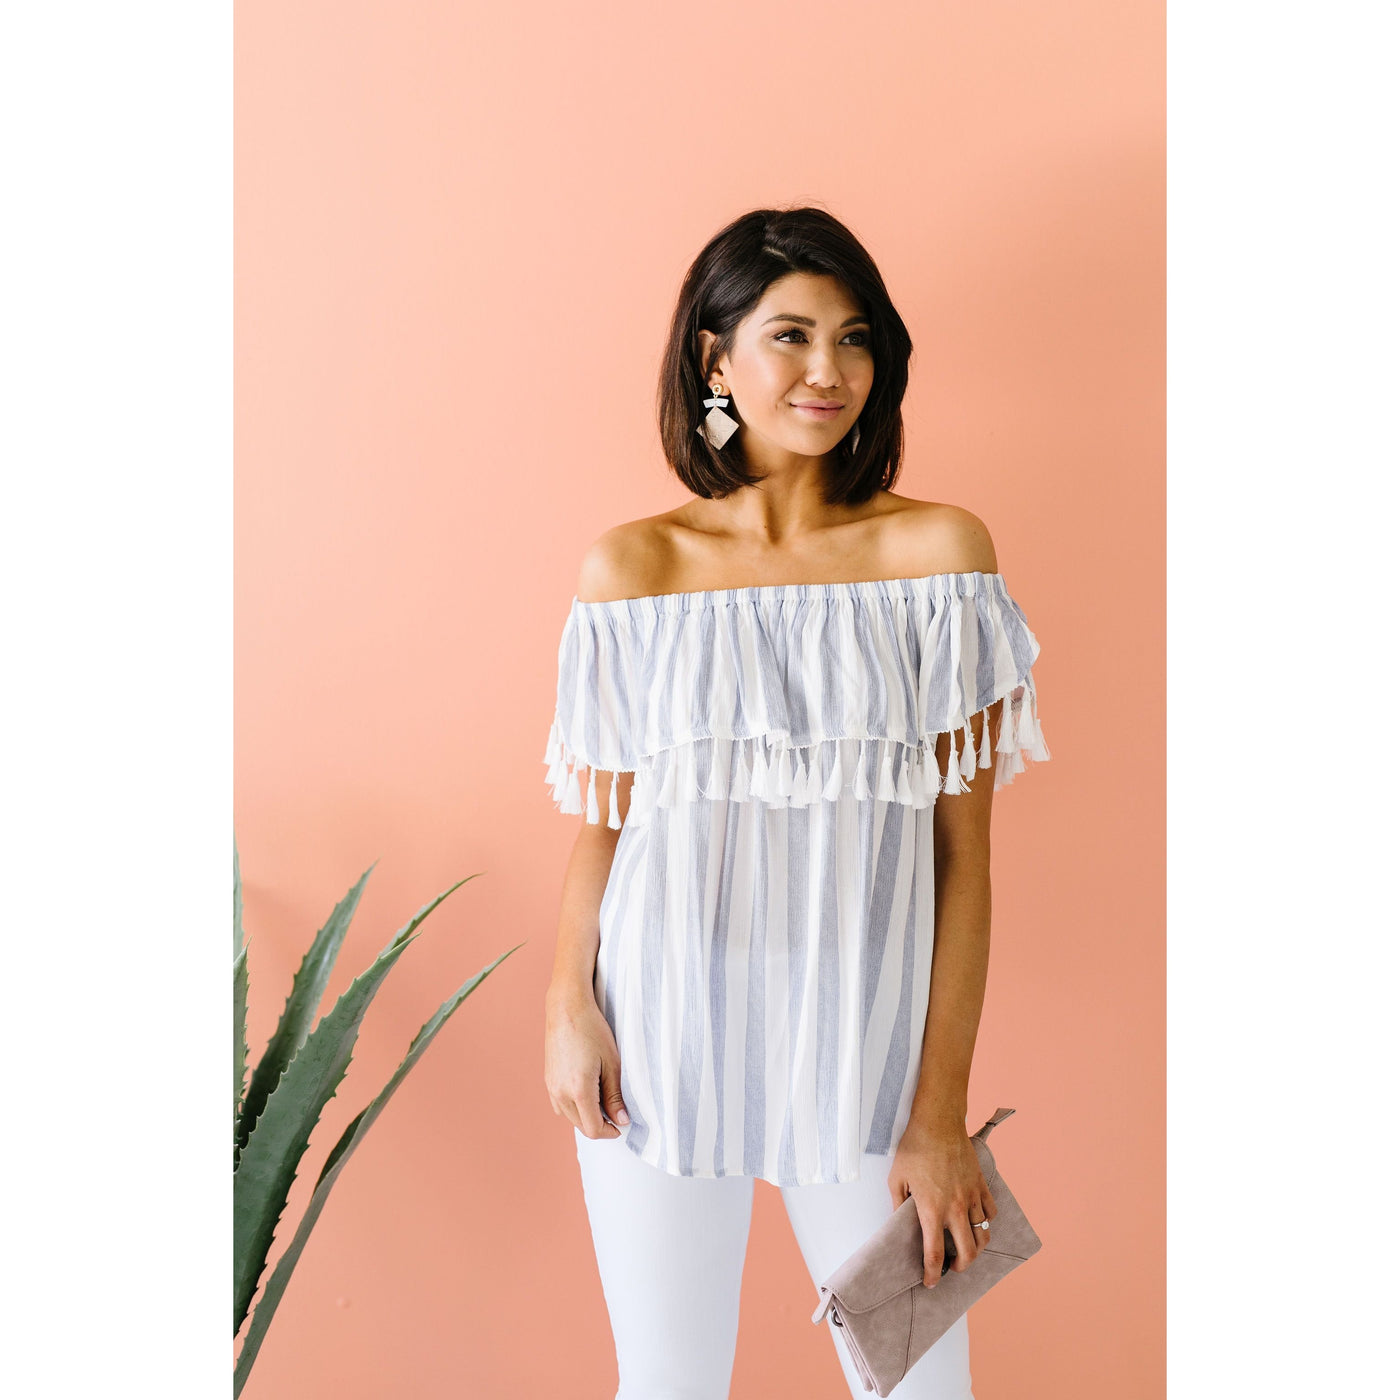 Stripes N Tassels Off Shoulder Blouse-Womens-Graceful & Chic Boutique, Family Clothing Store in Waxahachie, Texas